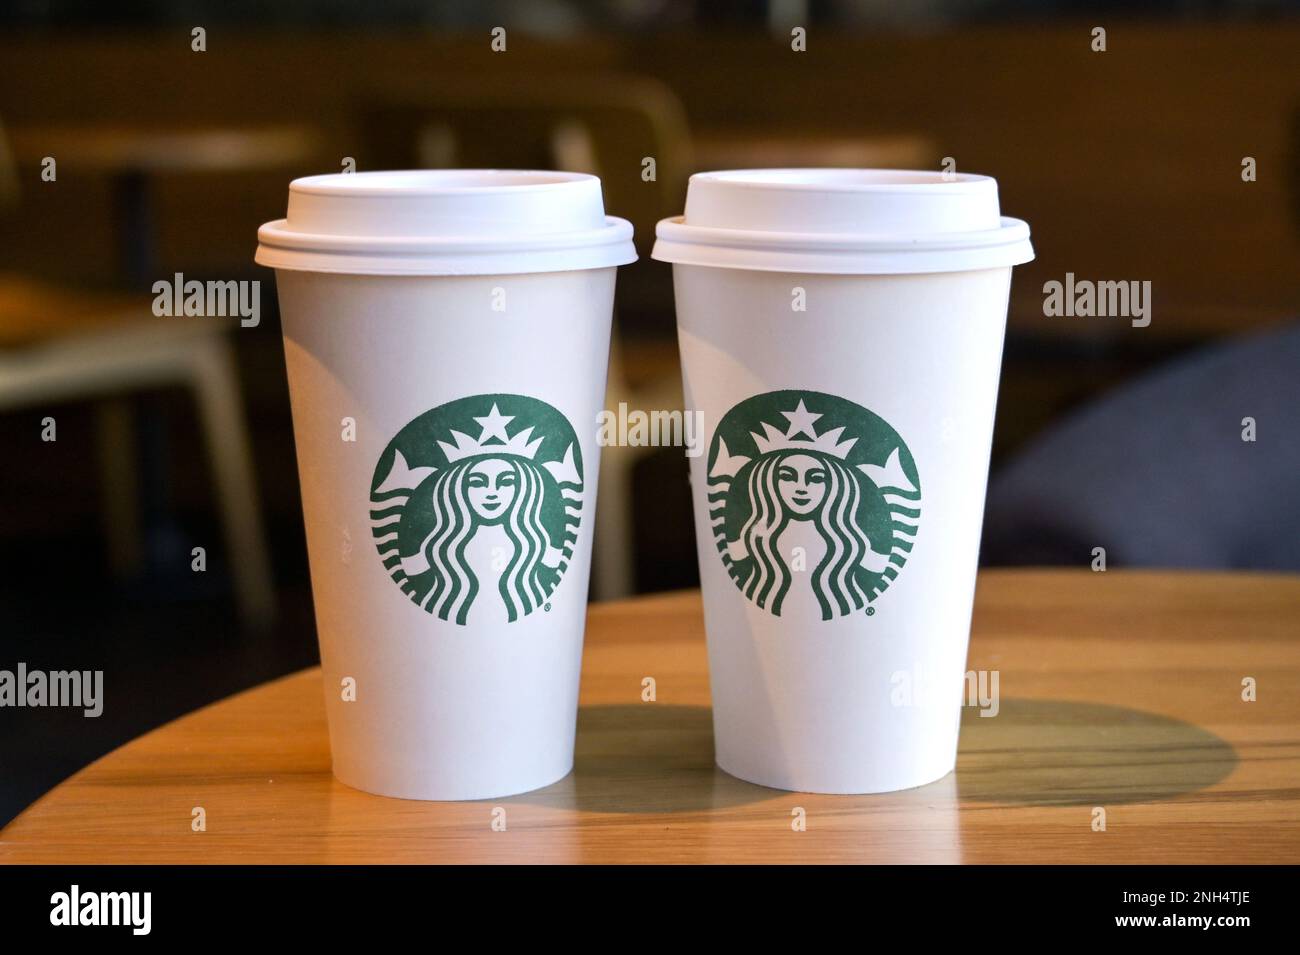 Austin, Texas - February 2023: Two paper cups with the Starbucks logo on a table in one of the company's chain of coffee shops Stock Photo